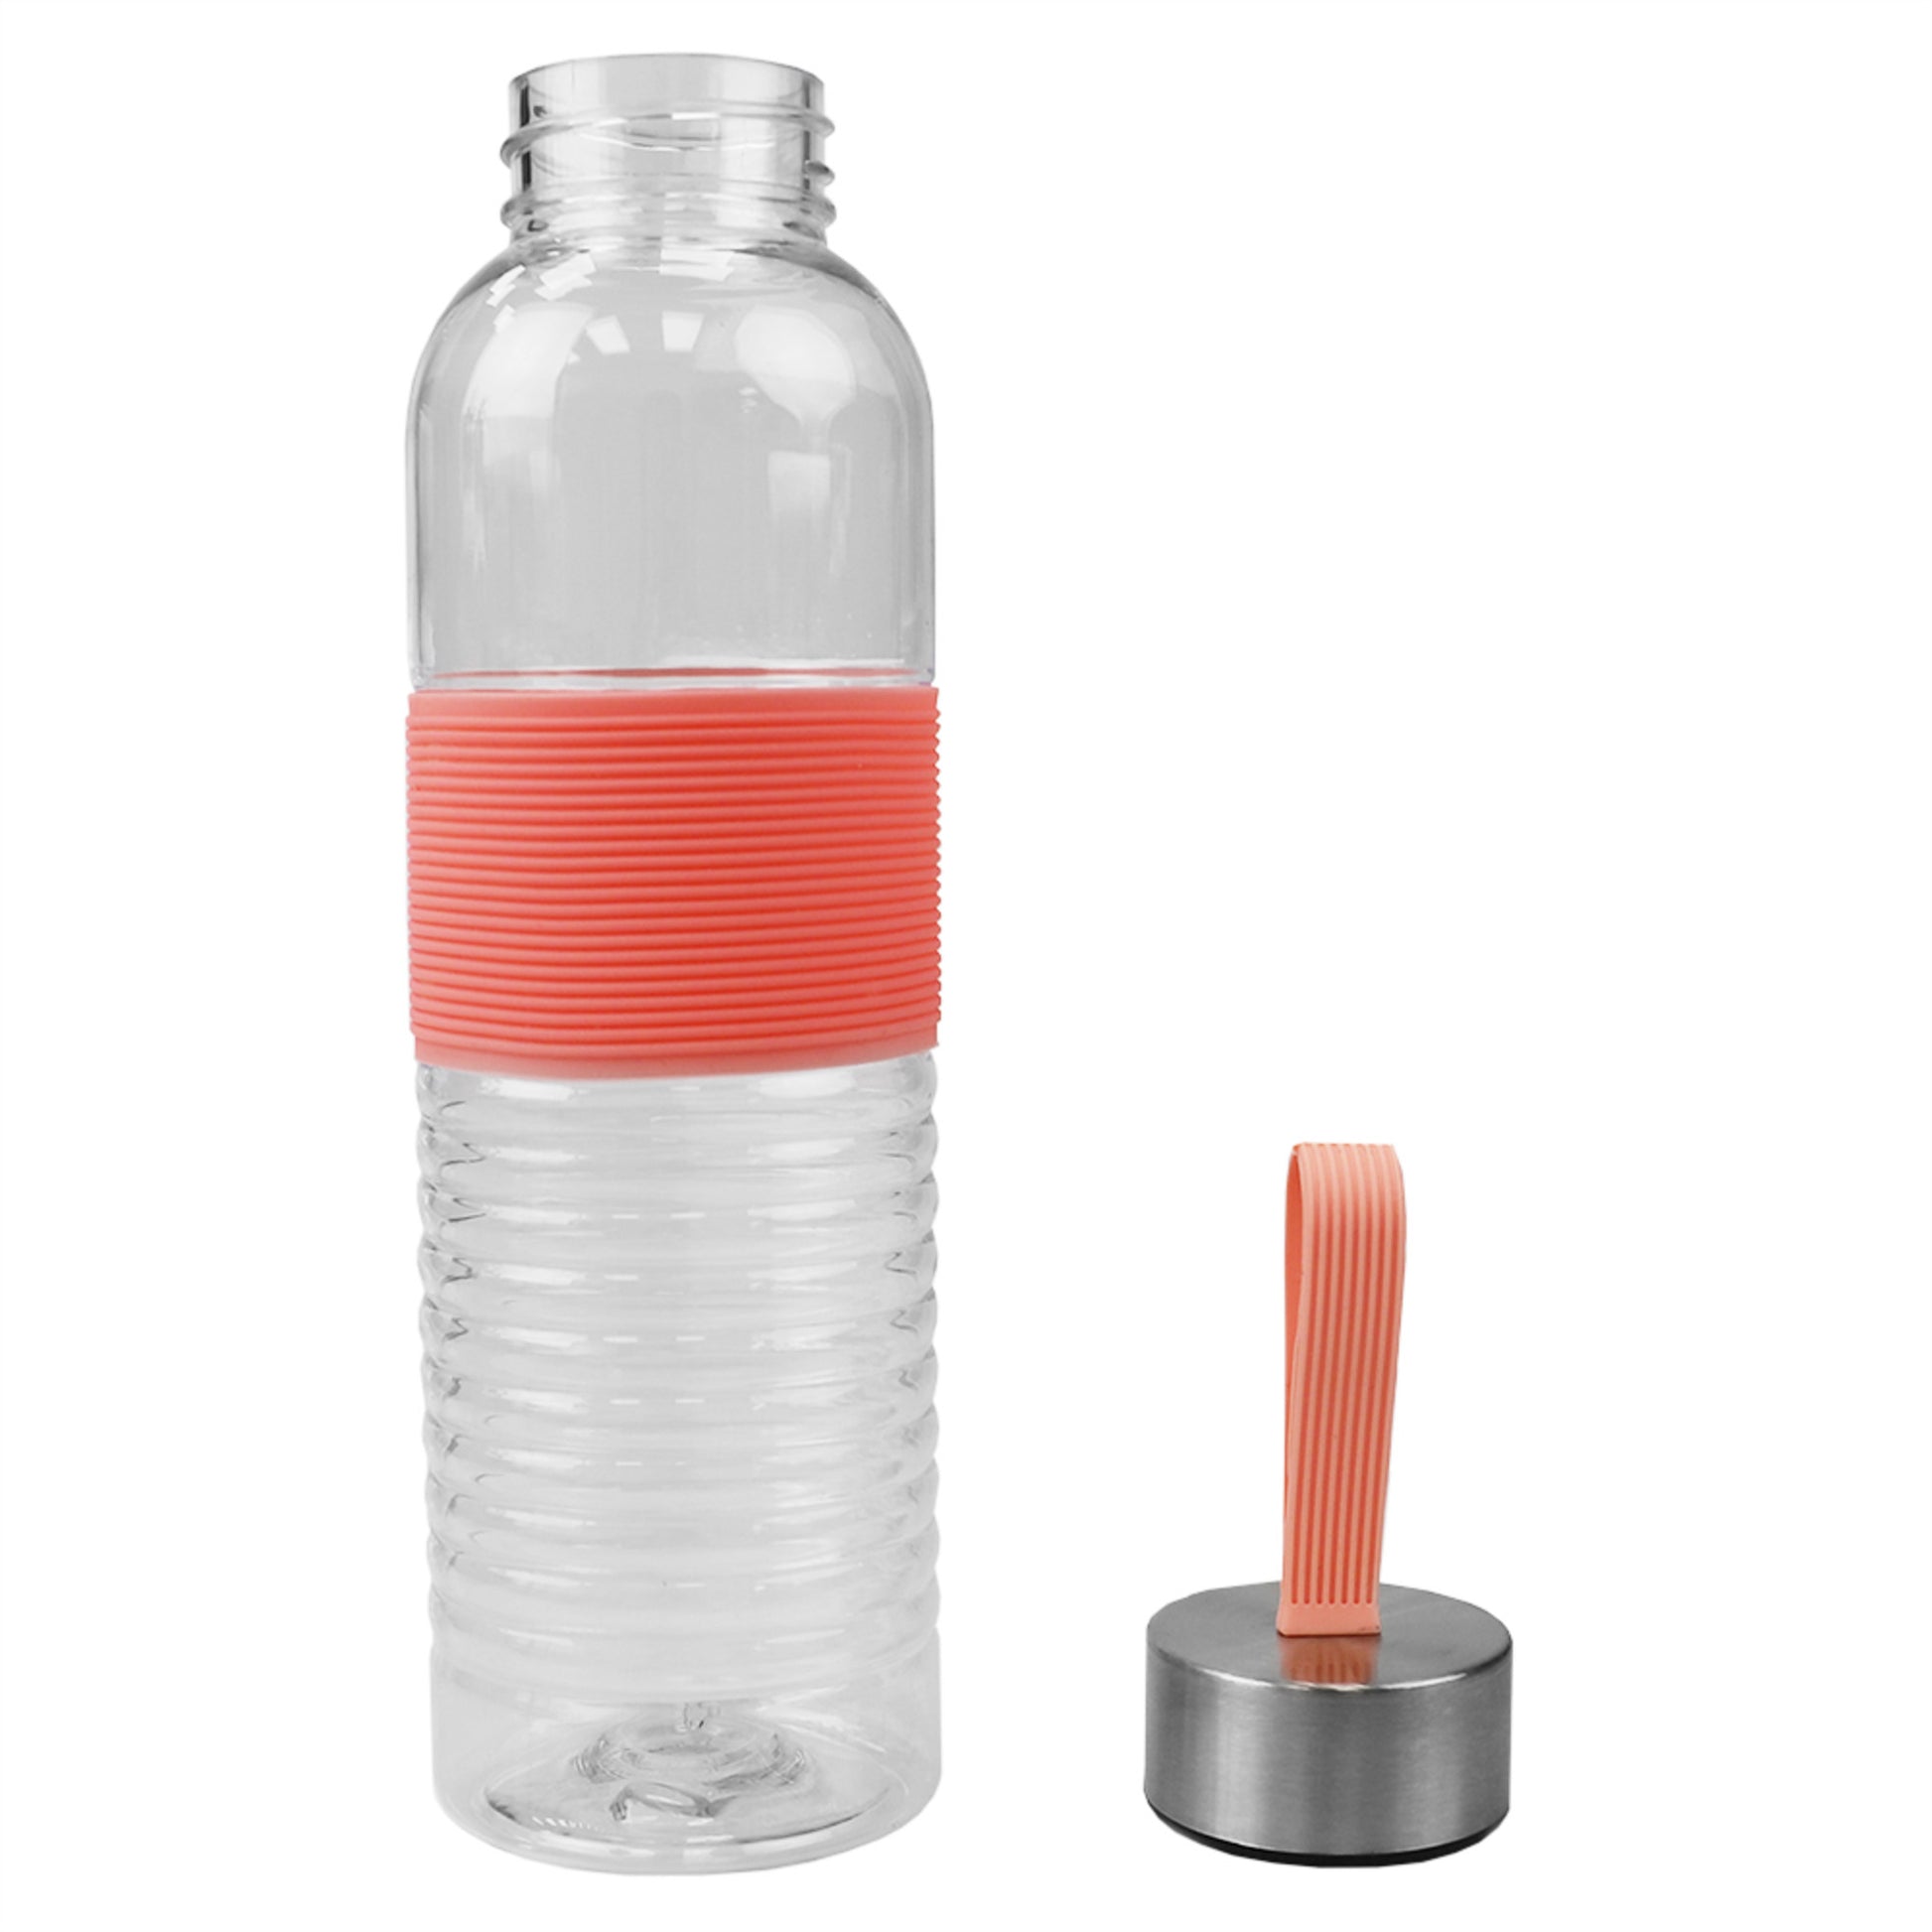 Home Basics 20 Oz. Plastic Travel Bottle with Built-in Carrying Strap and Textured Grip, Coral - Coral